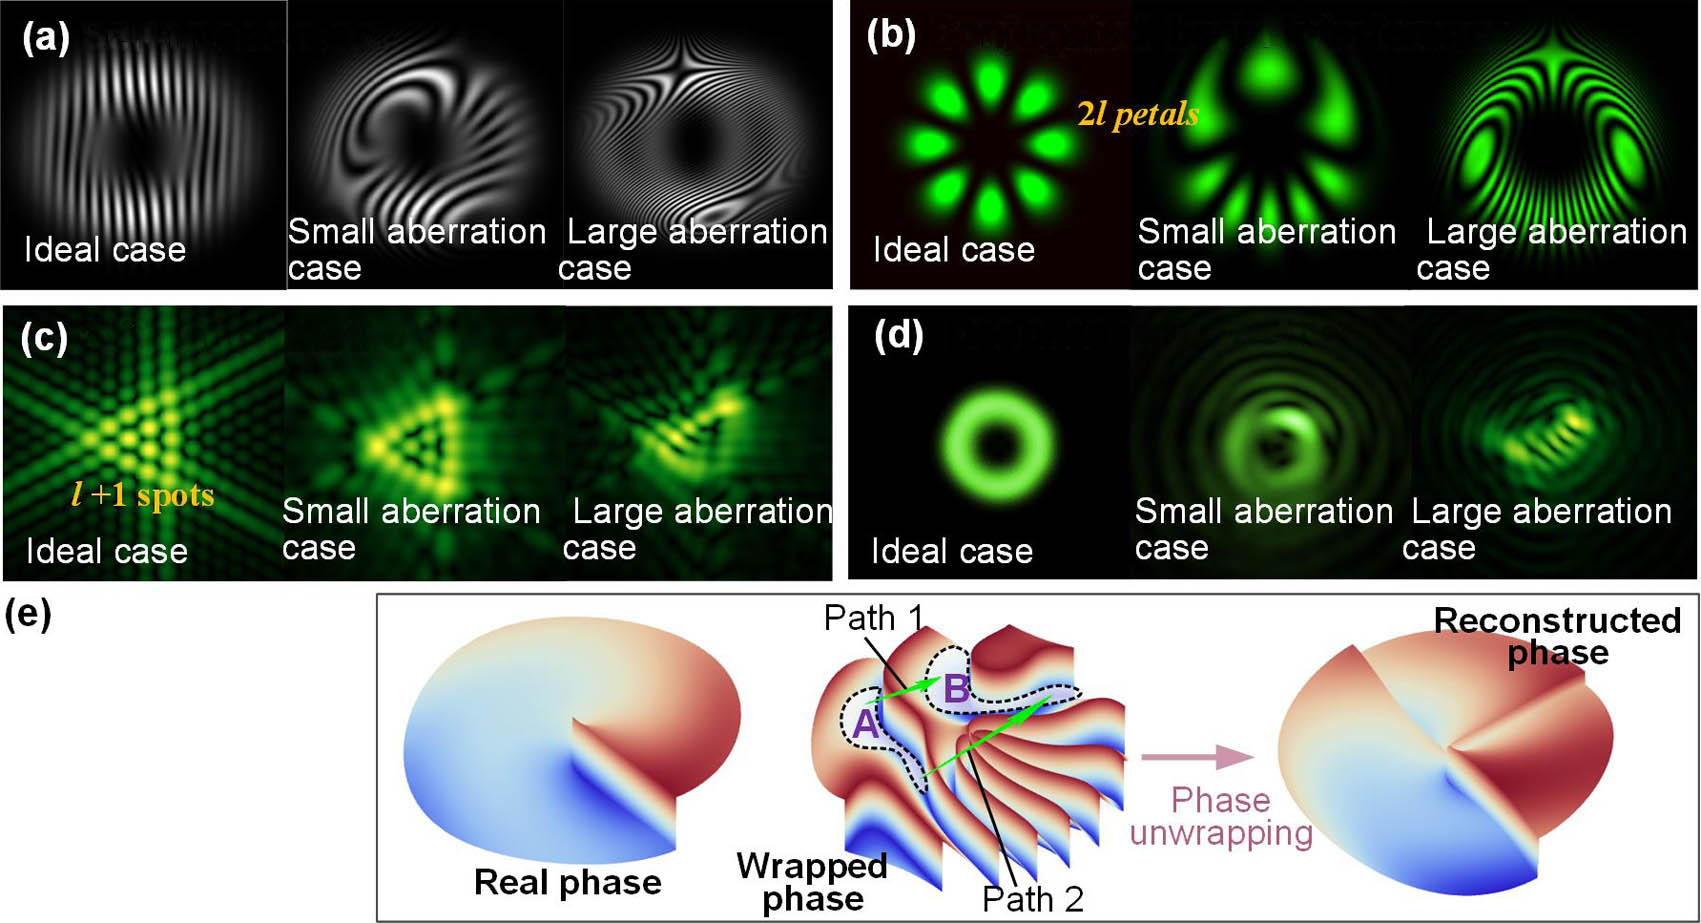 Mutual restraining of TC determination and phase recovery in a vortex beam of aberrations, in which (a)–(d) are the effect of aberrations on TC measurements while (e) is the effect of TC on the aberration phase measurement. (a) Bifurcations of self-interference fringes, (b) conjugated vortex beam interference patterns, (c) triangular aperture diffraction patterns, (d) hollow intensity image from which TC is determined by deep learning, (e) phase unwrapping dilemma due to the phase jump aliasing in the vortex phase.